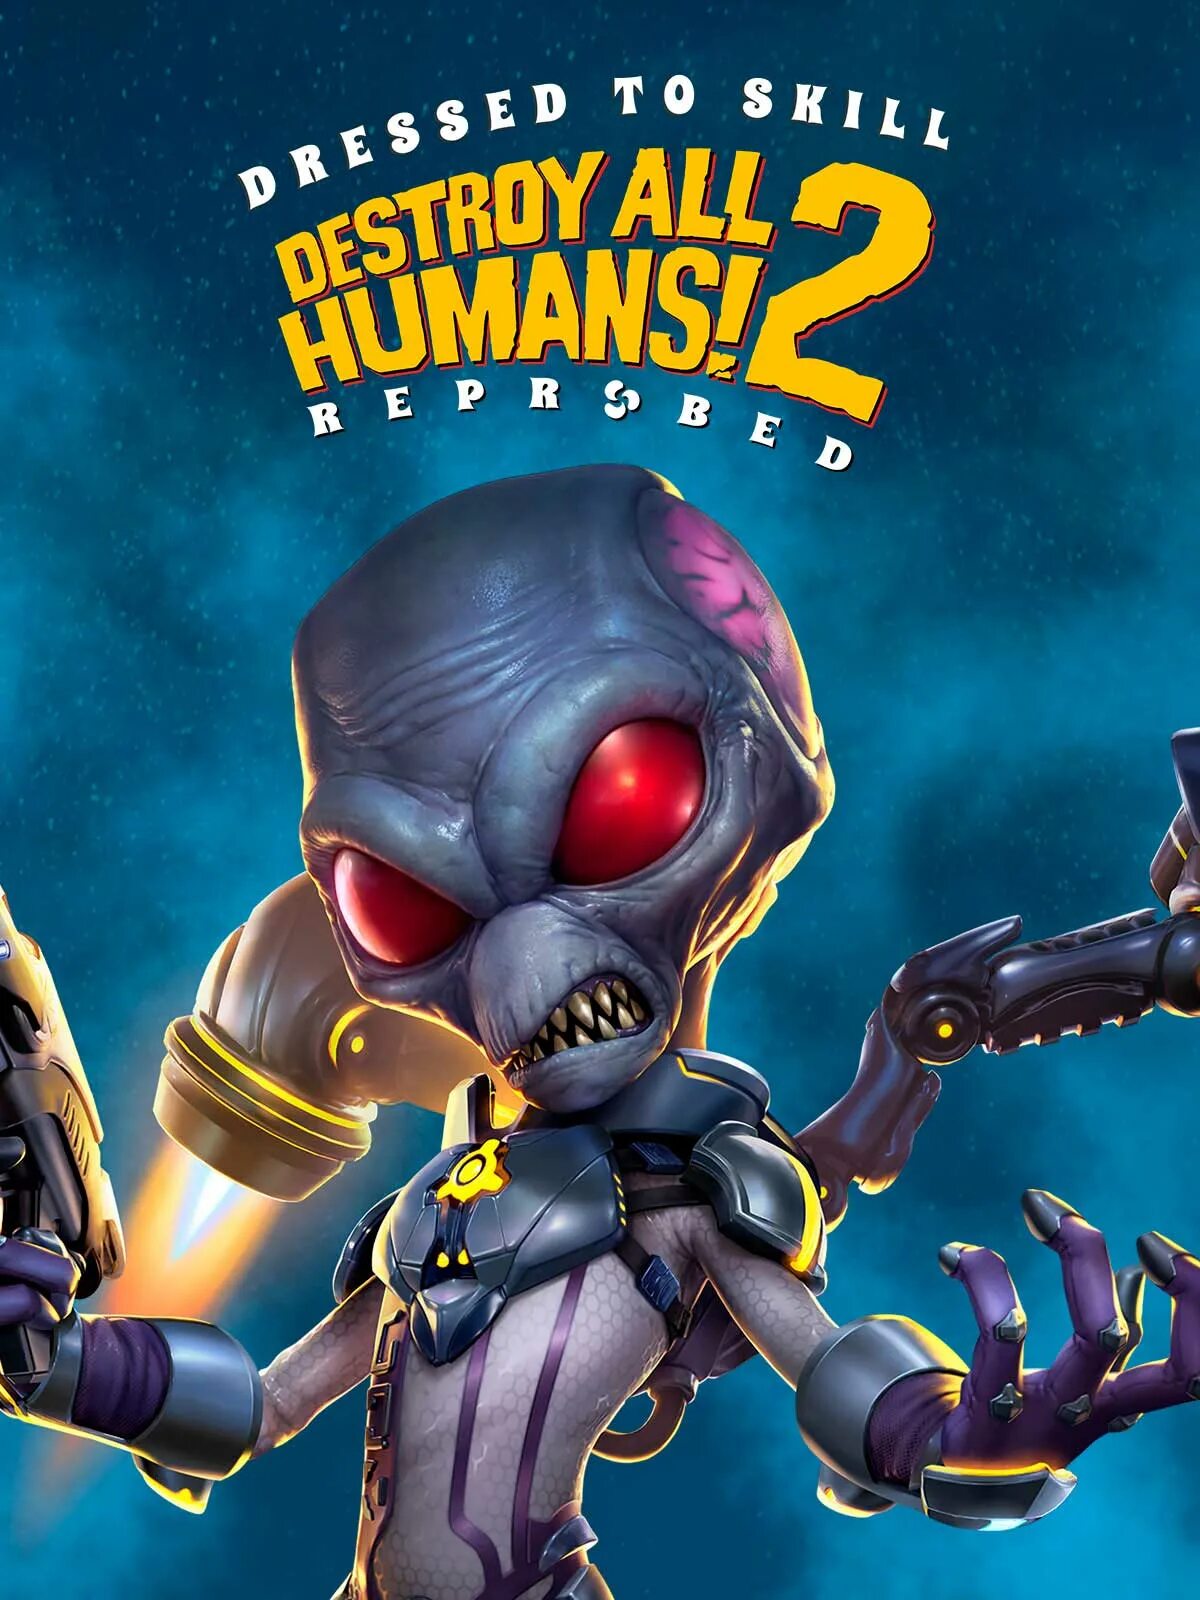 Destroy all Humans 2 reprobed. Destroy all Humans!. Destroy all Humans! 2 - Reprobed: Dressed to skill Edition. Destroy all Humans reprobed.